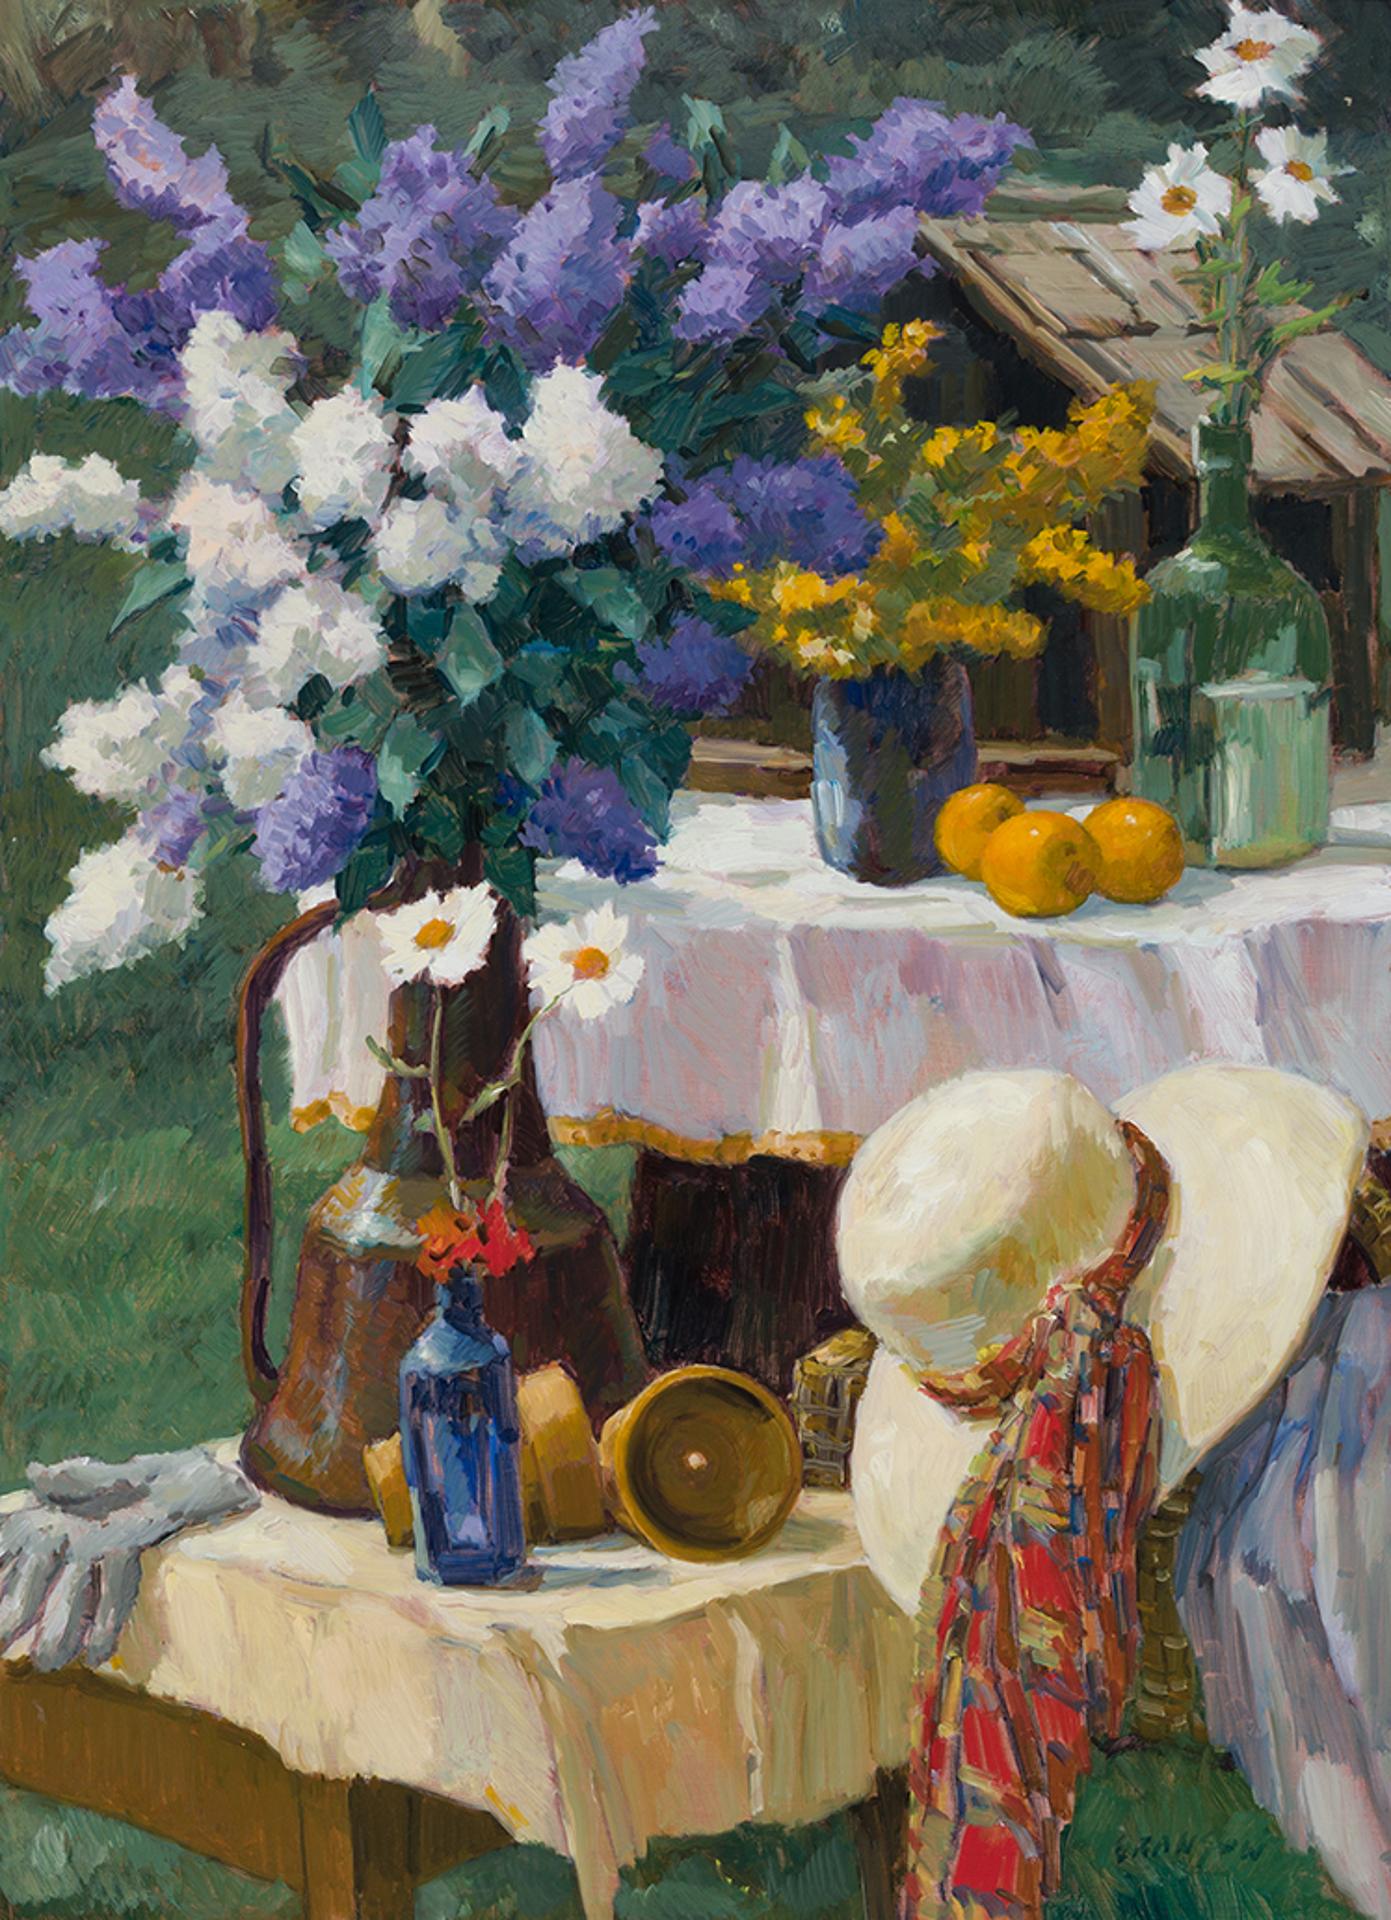 Helmut Gransow (1921-2012) - Garden Still Life with Summer Hat and Lilacs